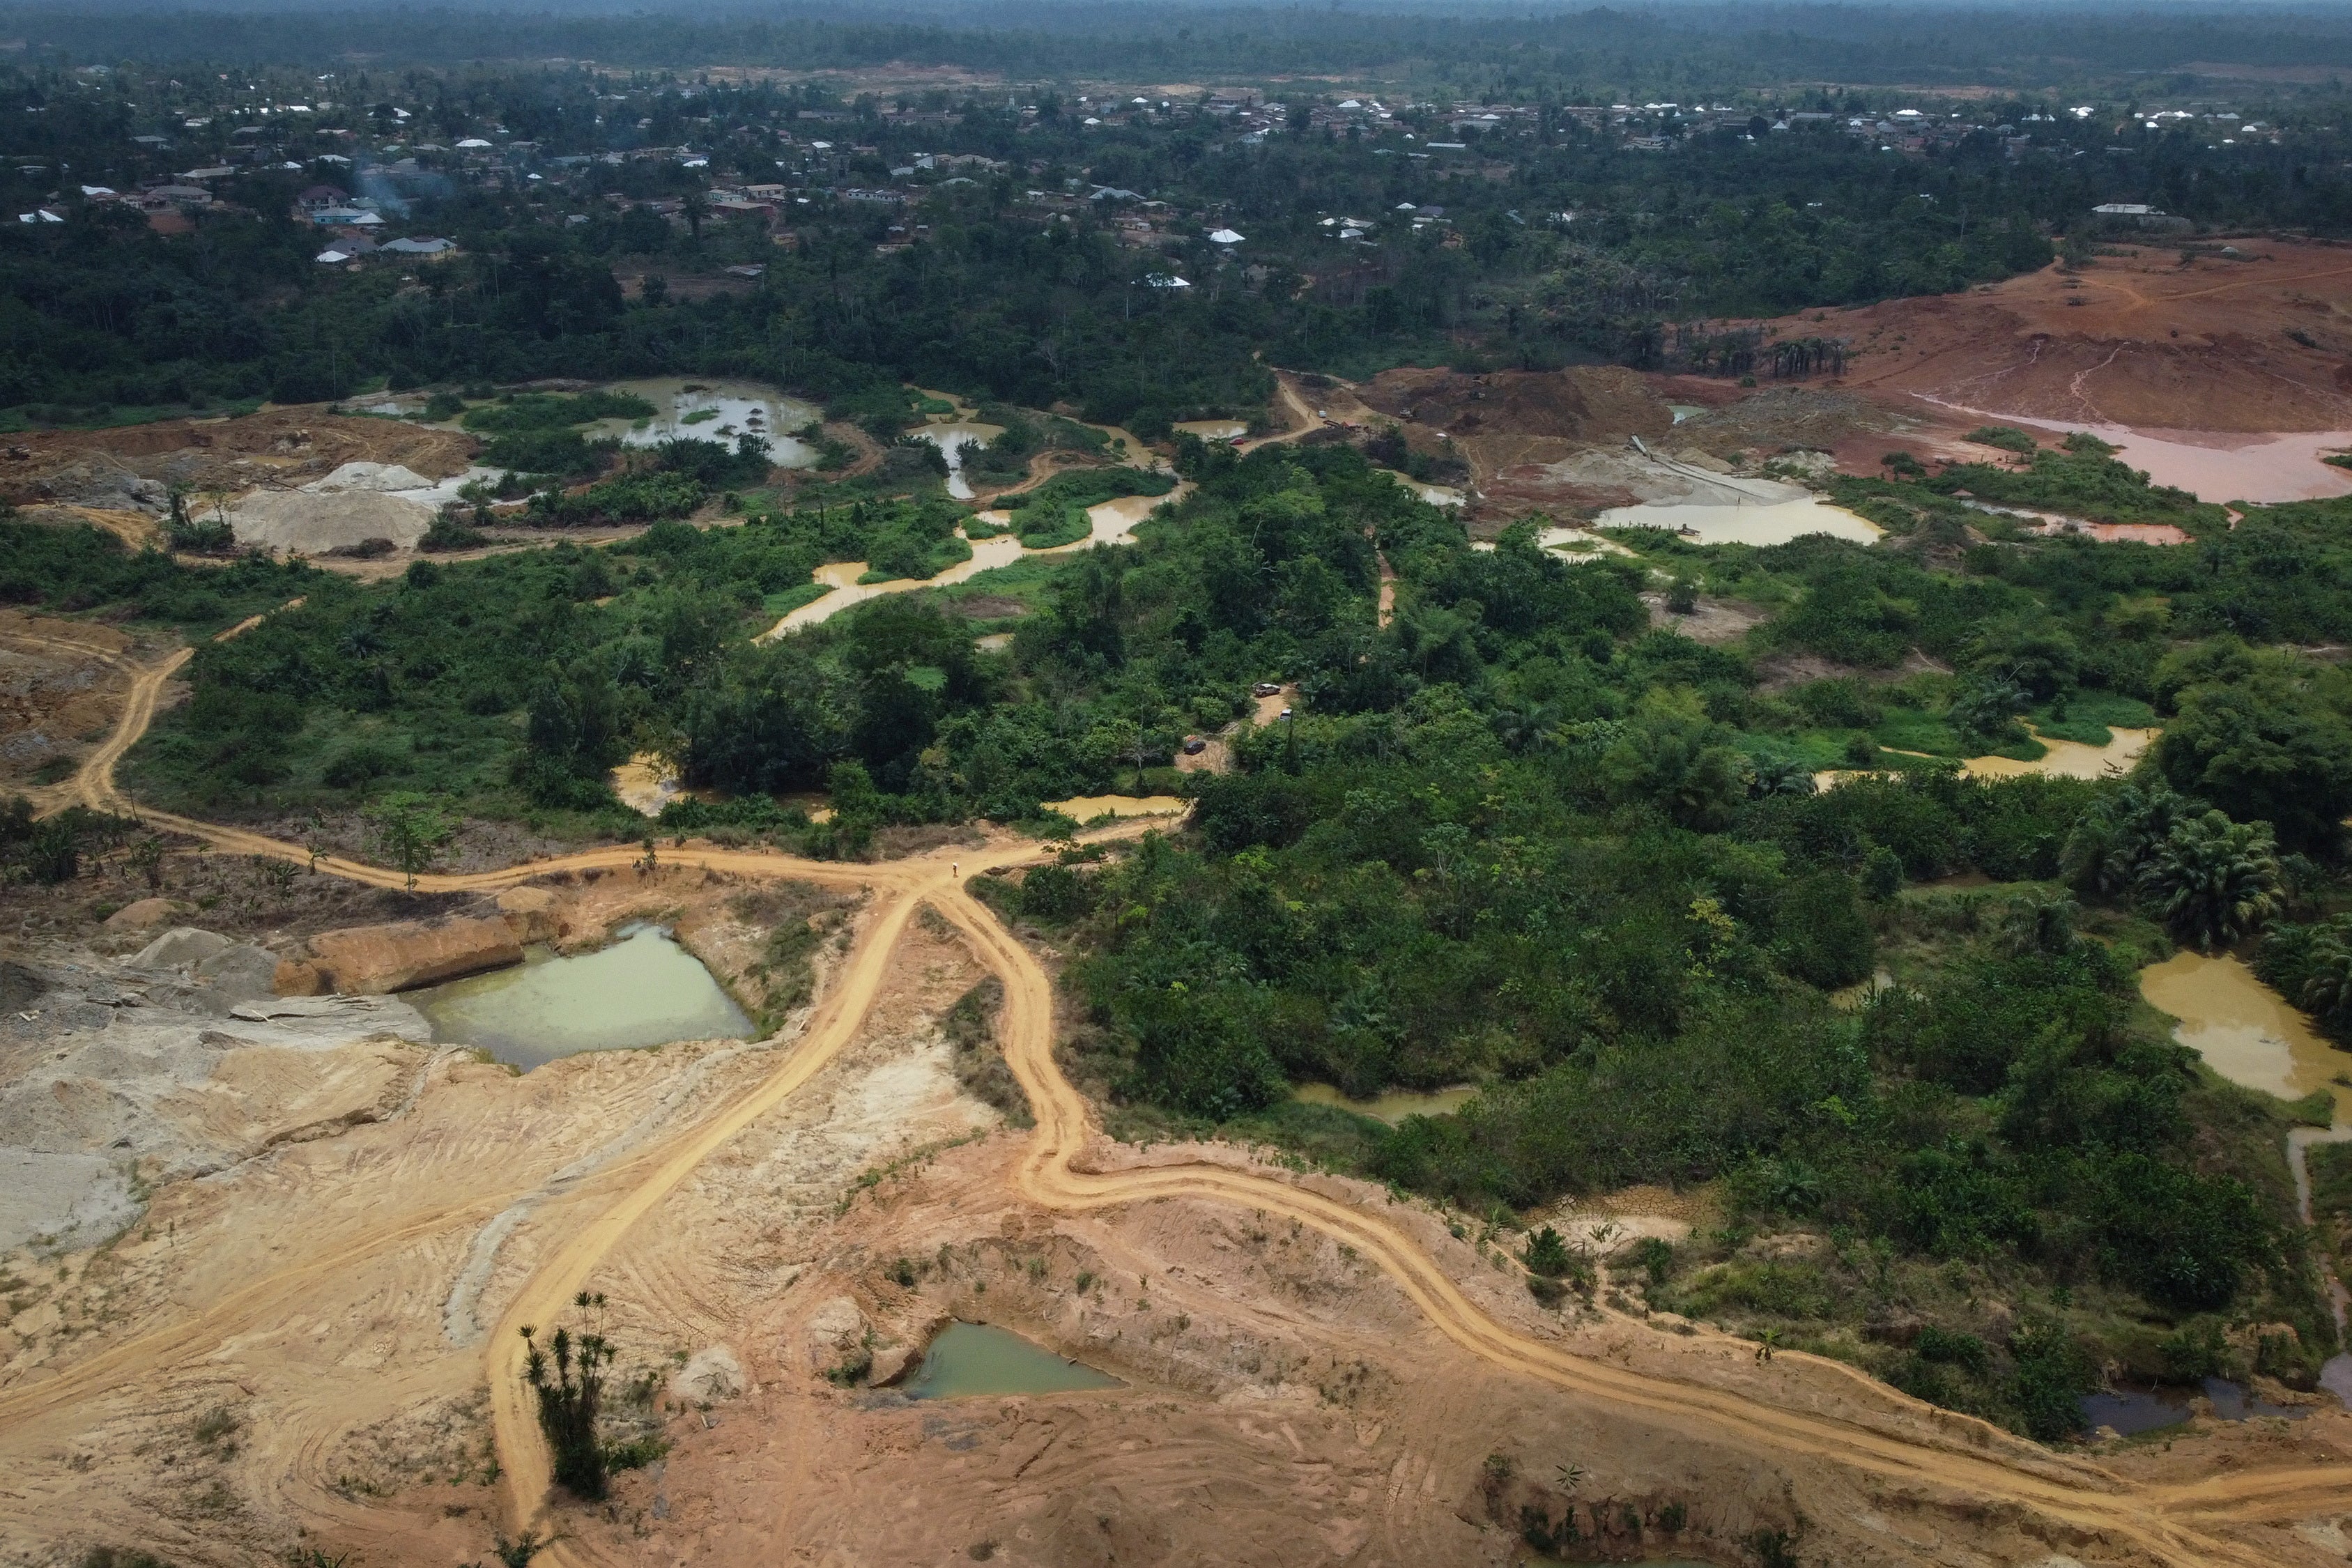 A drone view shows cocoa plantations and farms destroyed by illegal gold mining in Kwabeng